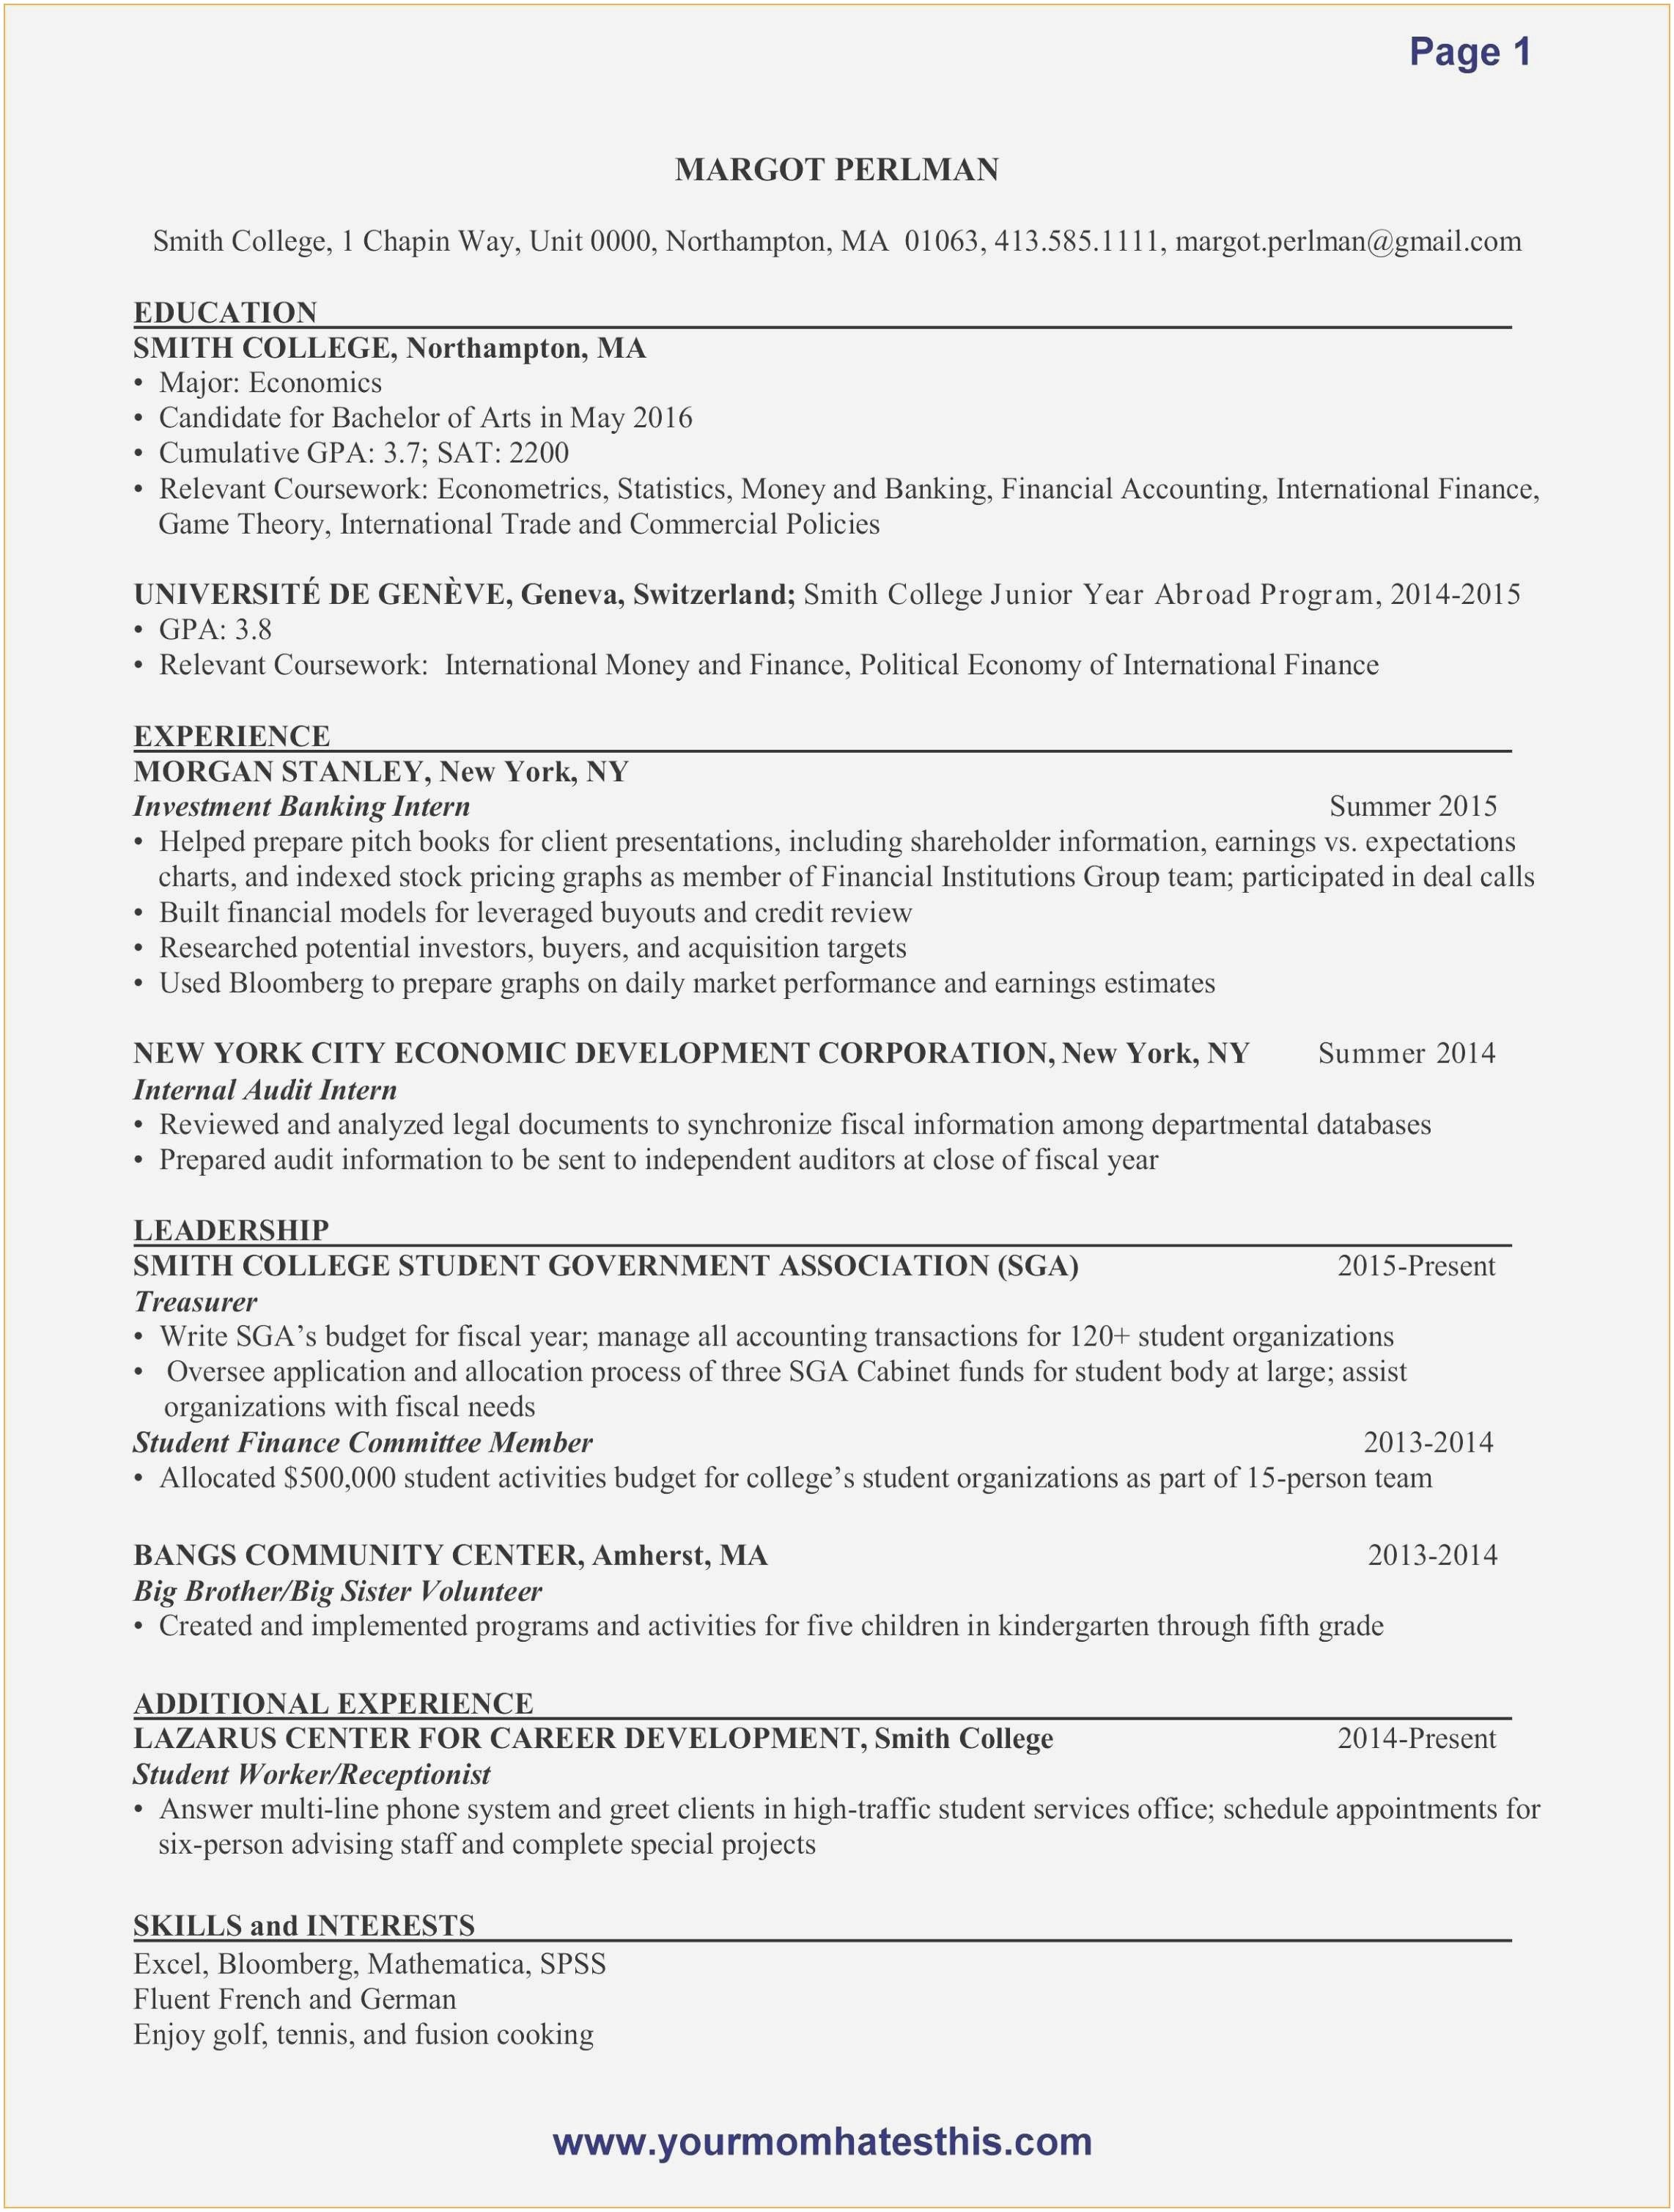 Resume Examples for Accounting Jobs Elegant Resume Samples Cpa Valid Accountant Resume Samples Job Resume